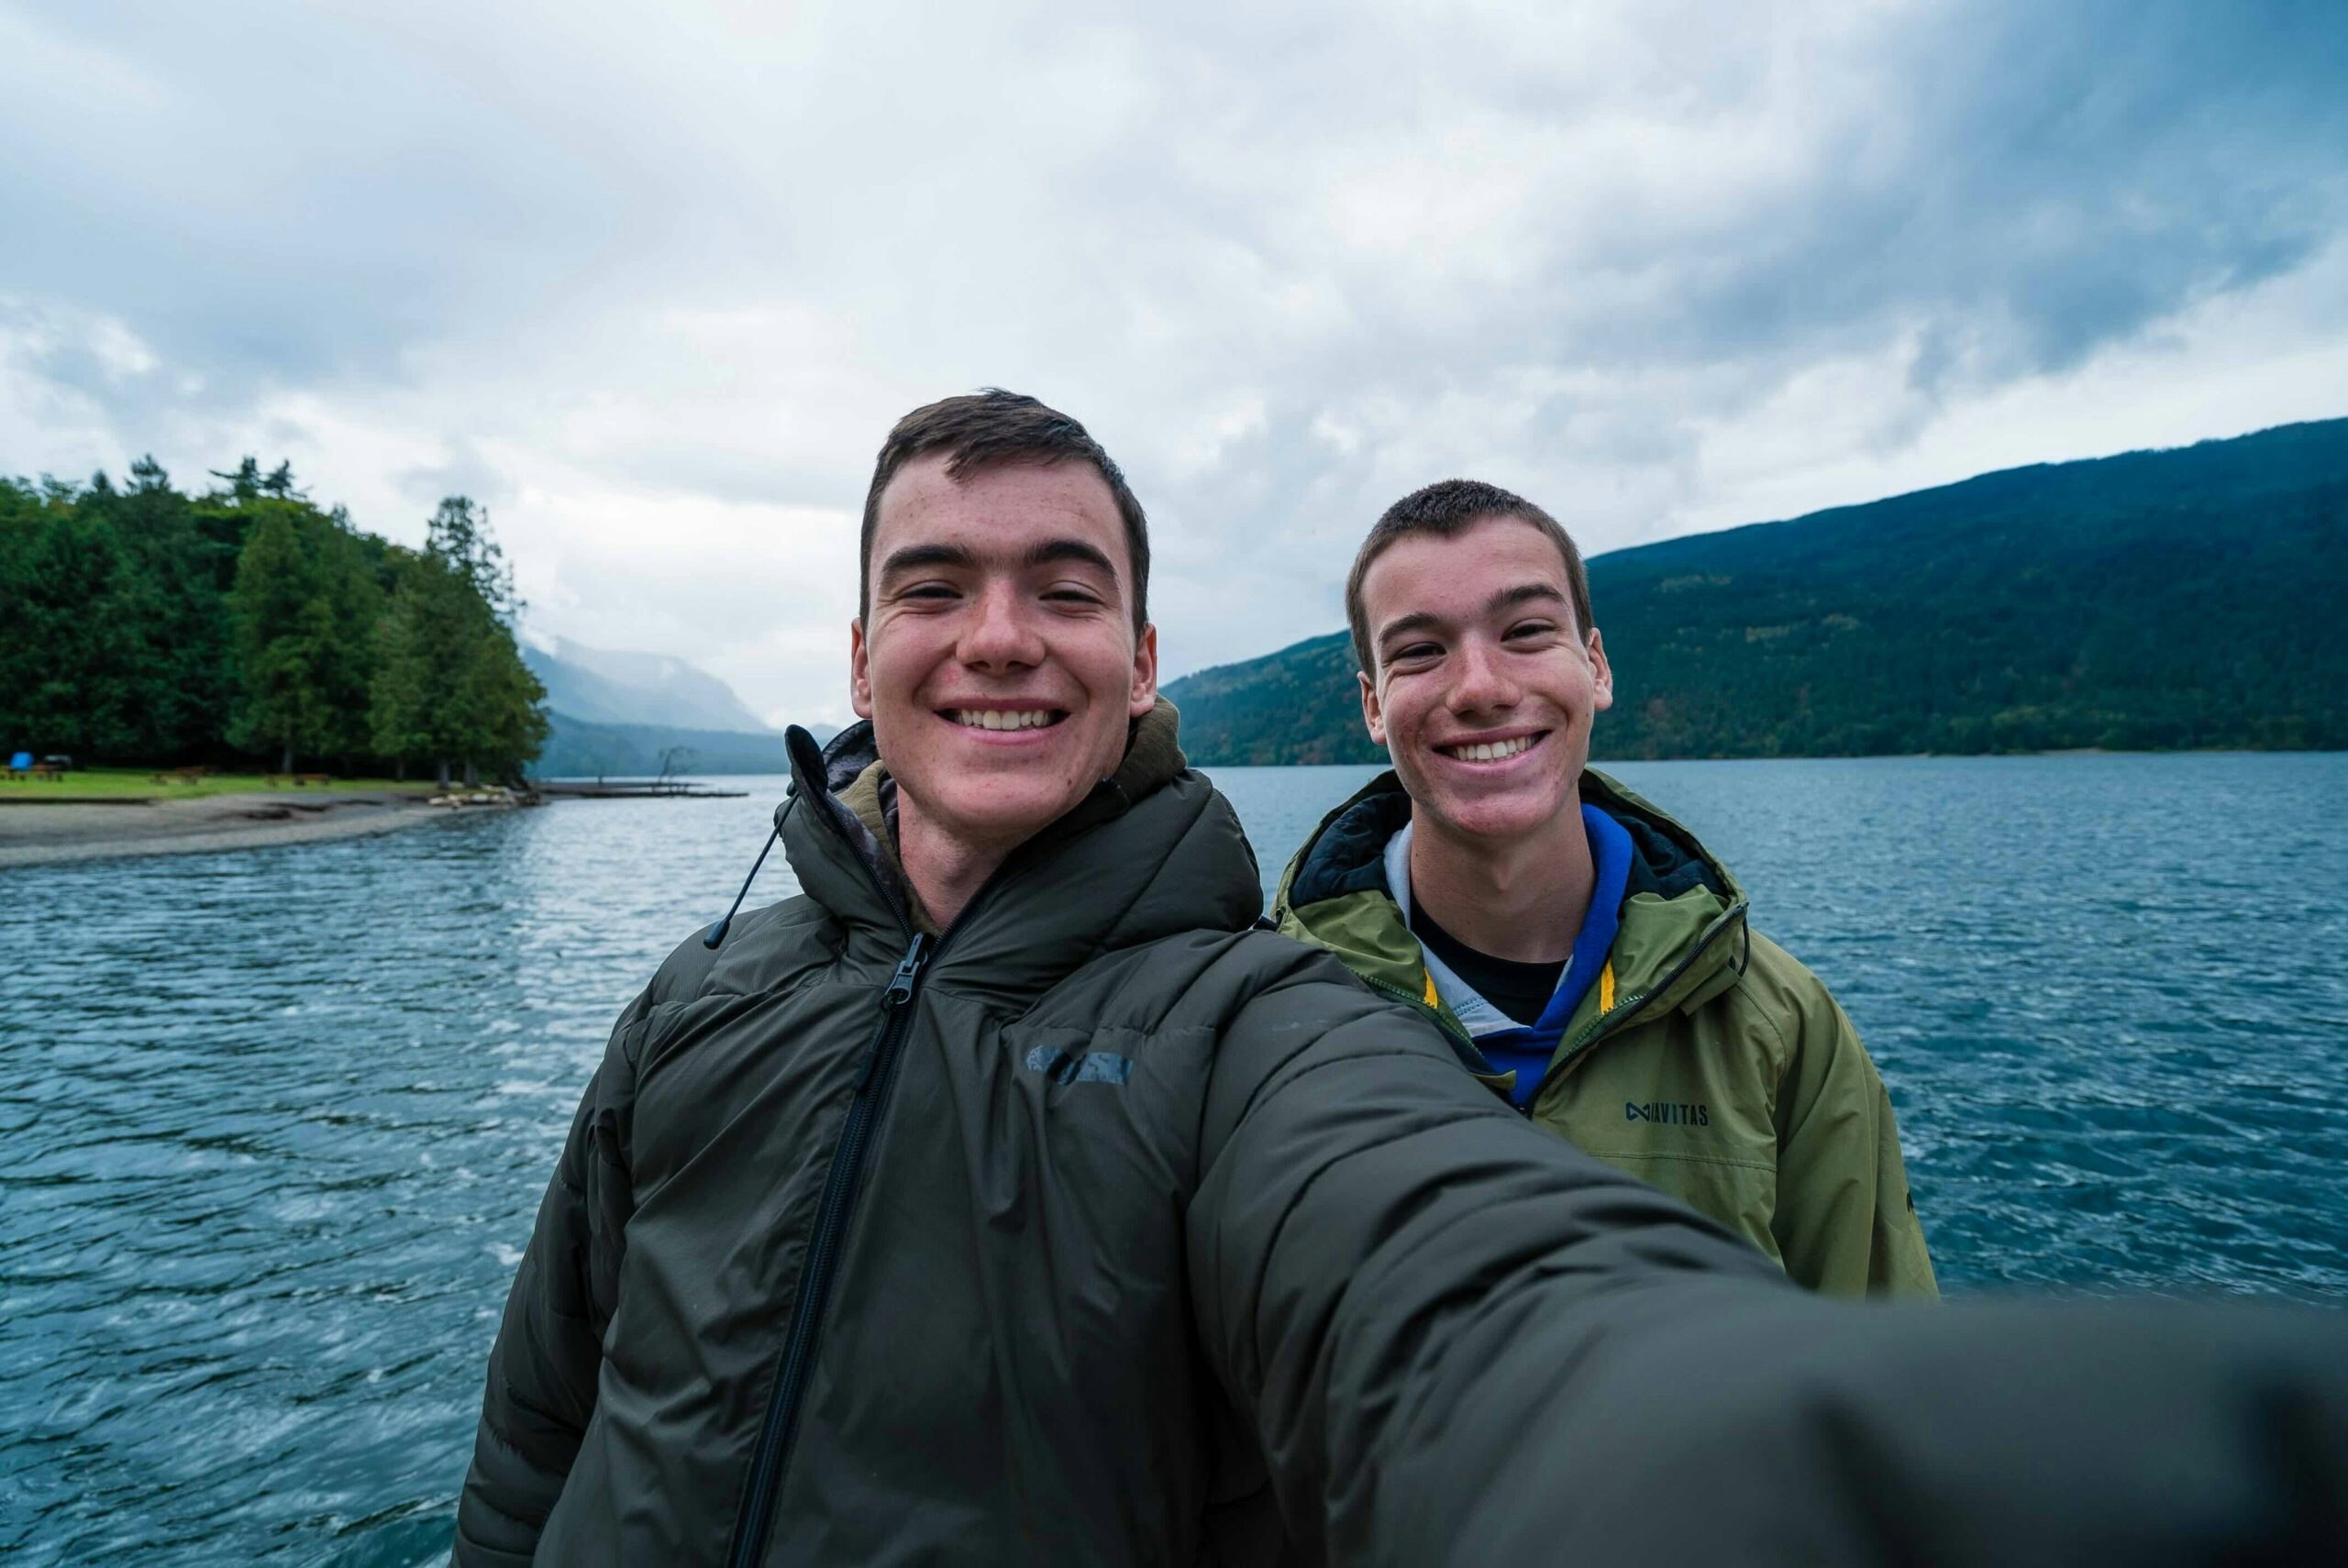 Carl and Alex rose to fame with their fishing adventures on Youtube.